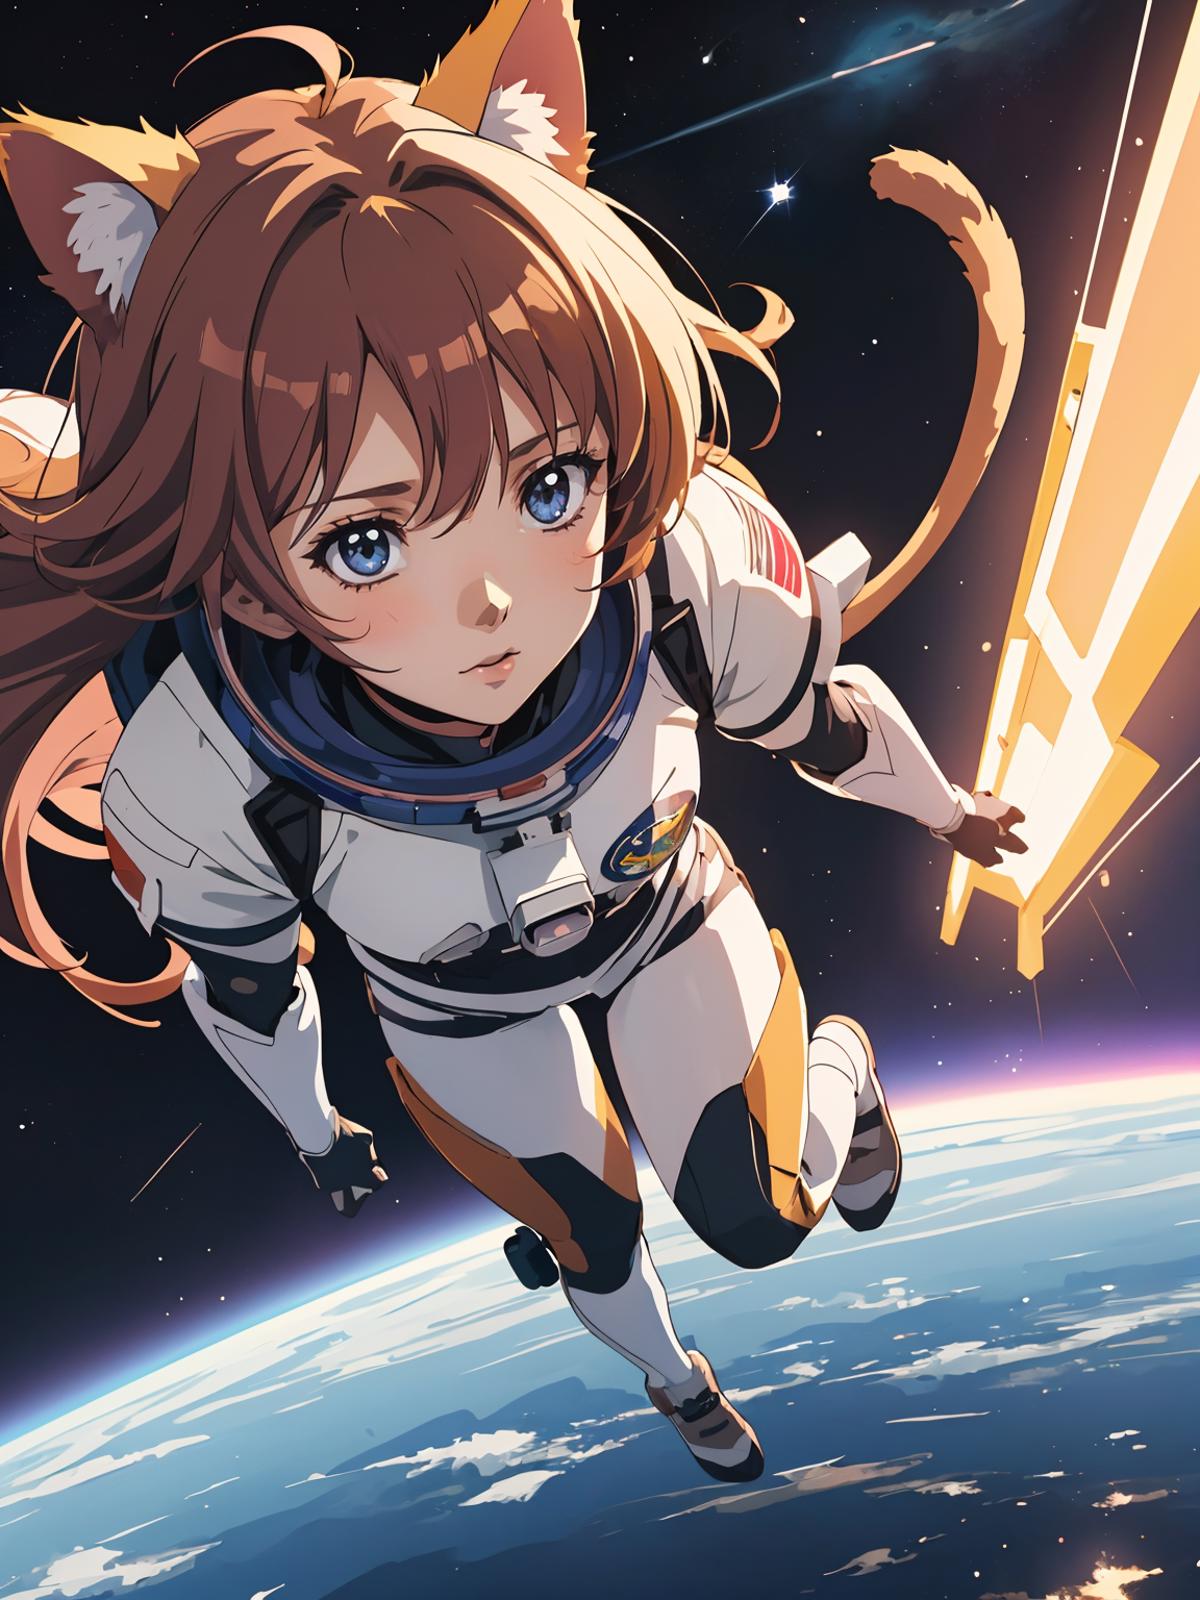 A Japanese anime illustration of a female astronaut in a white and orange spacesuit, floating in the air and looking up at the stars. The scene is set against a backdrop of a blue sky with white stars.